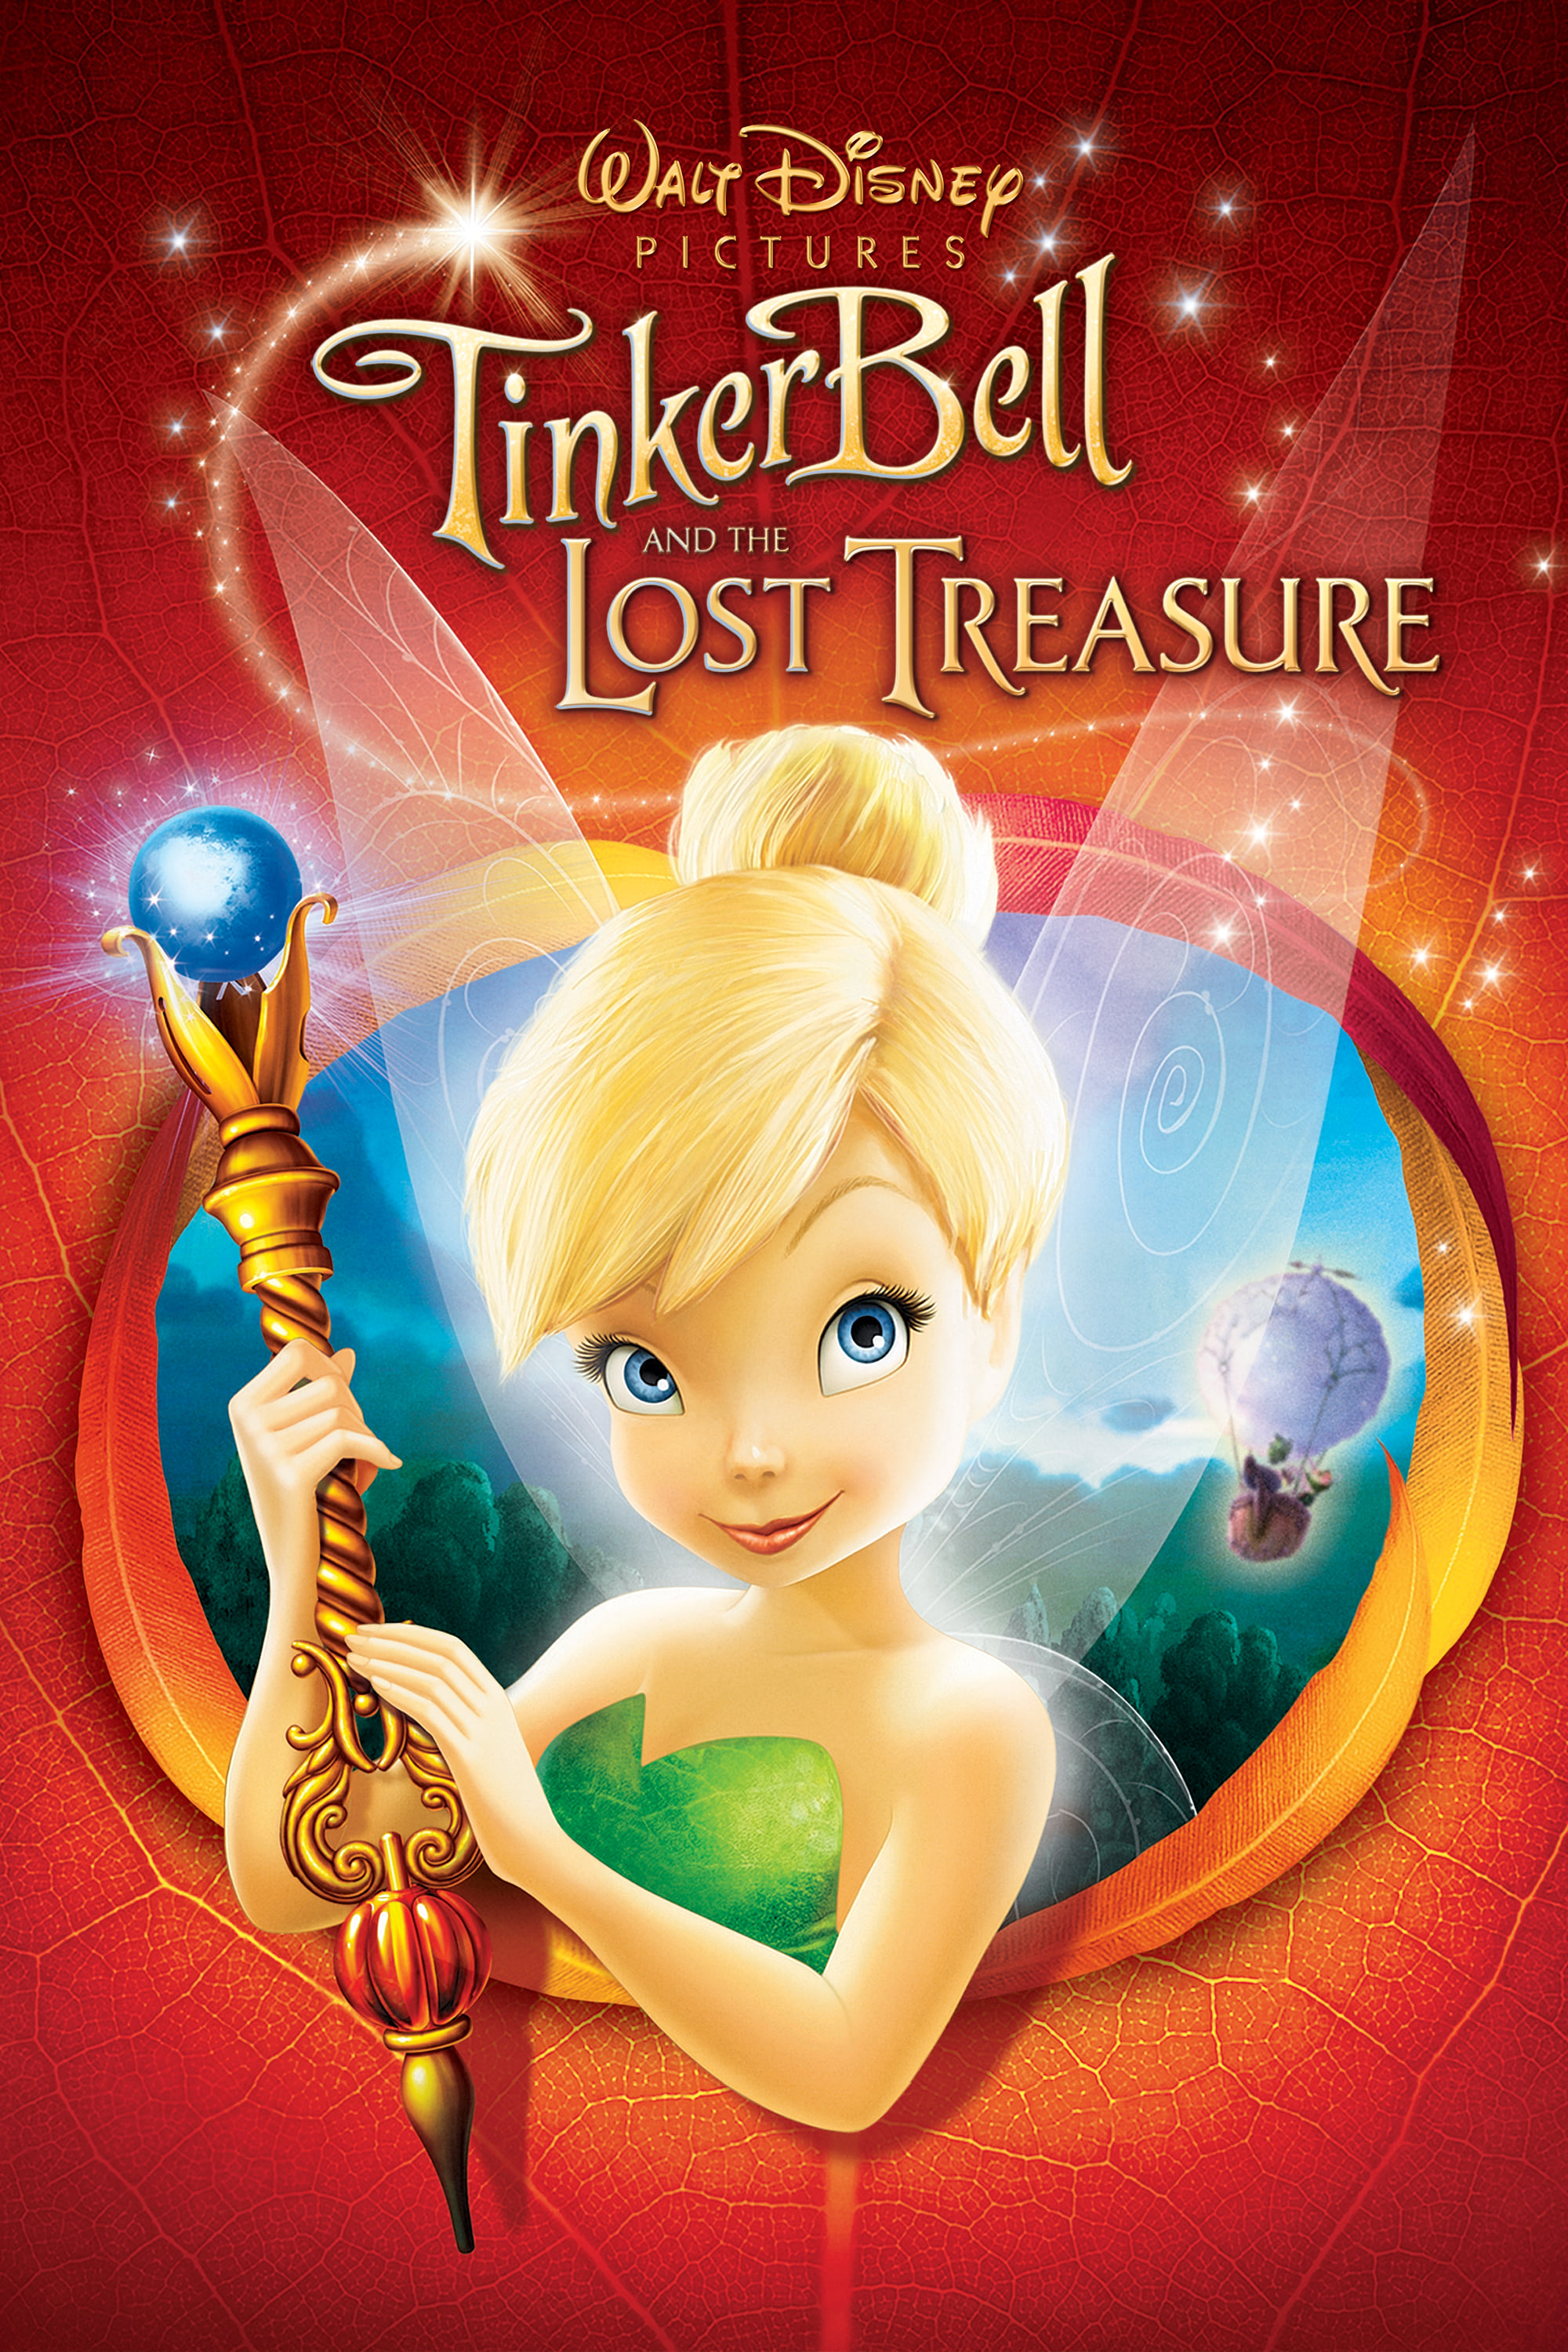 Tinker Bell and the Lost Treasure (2009)